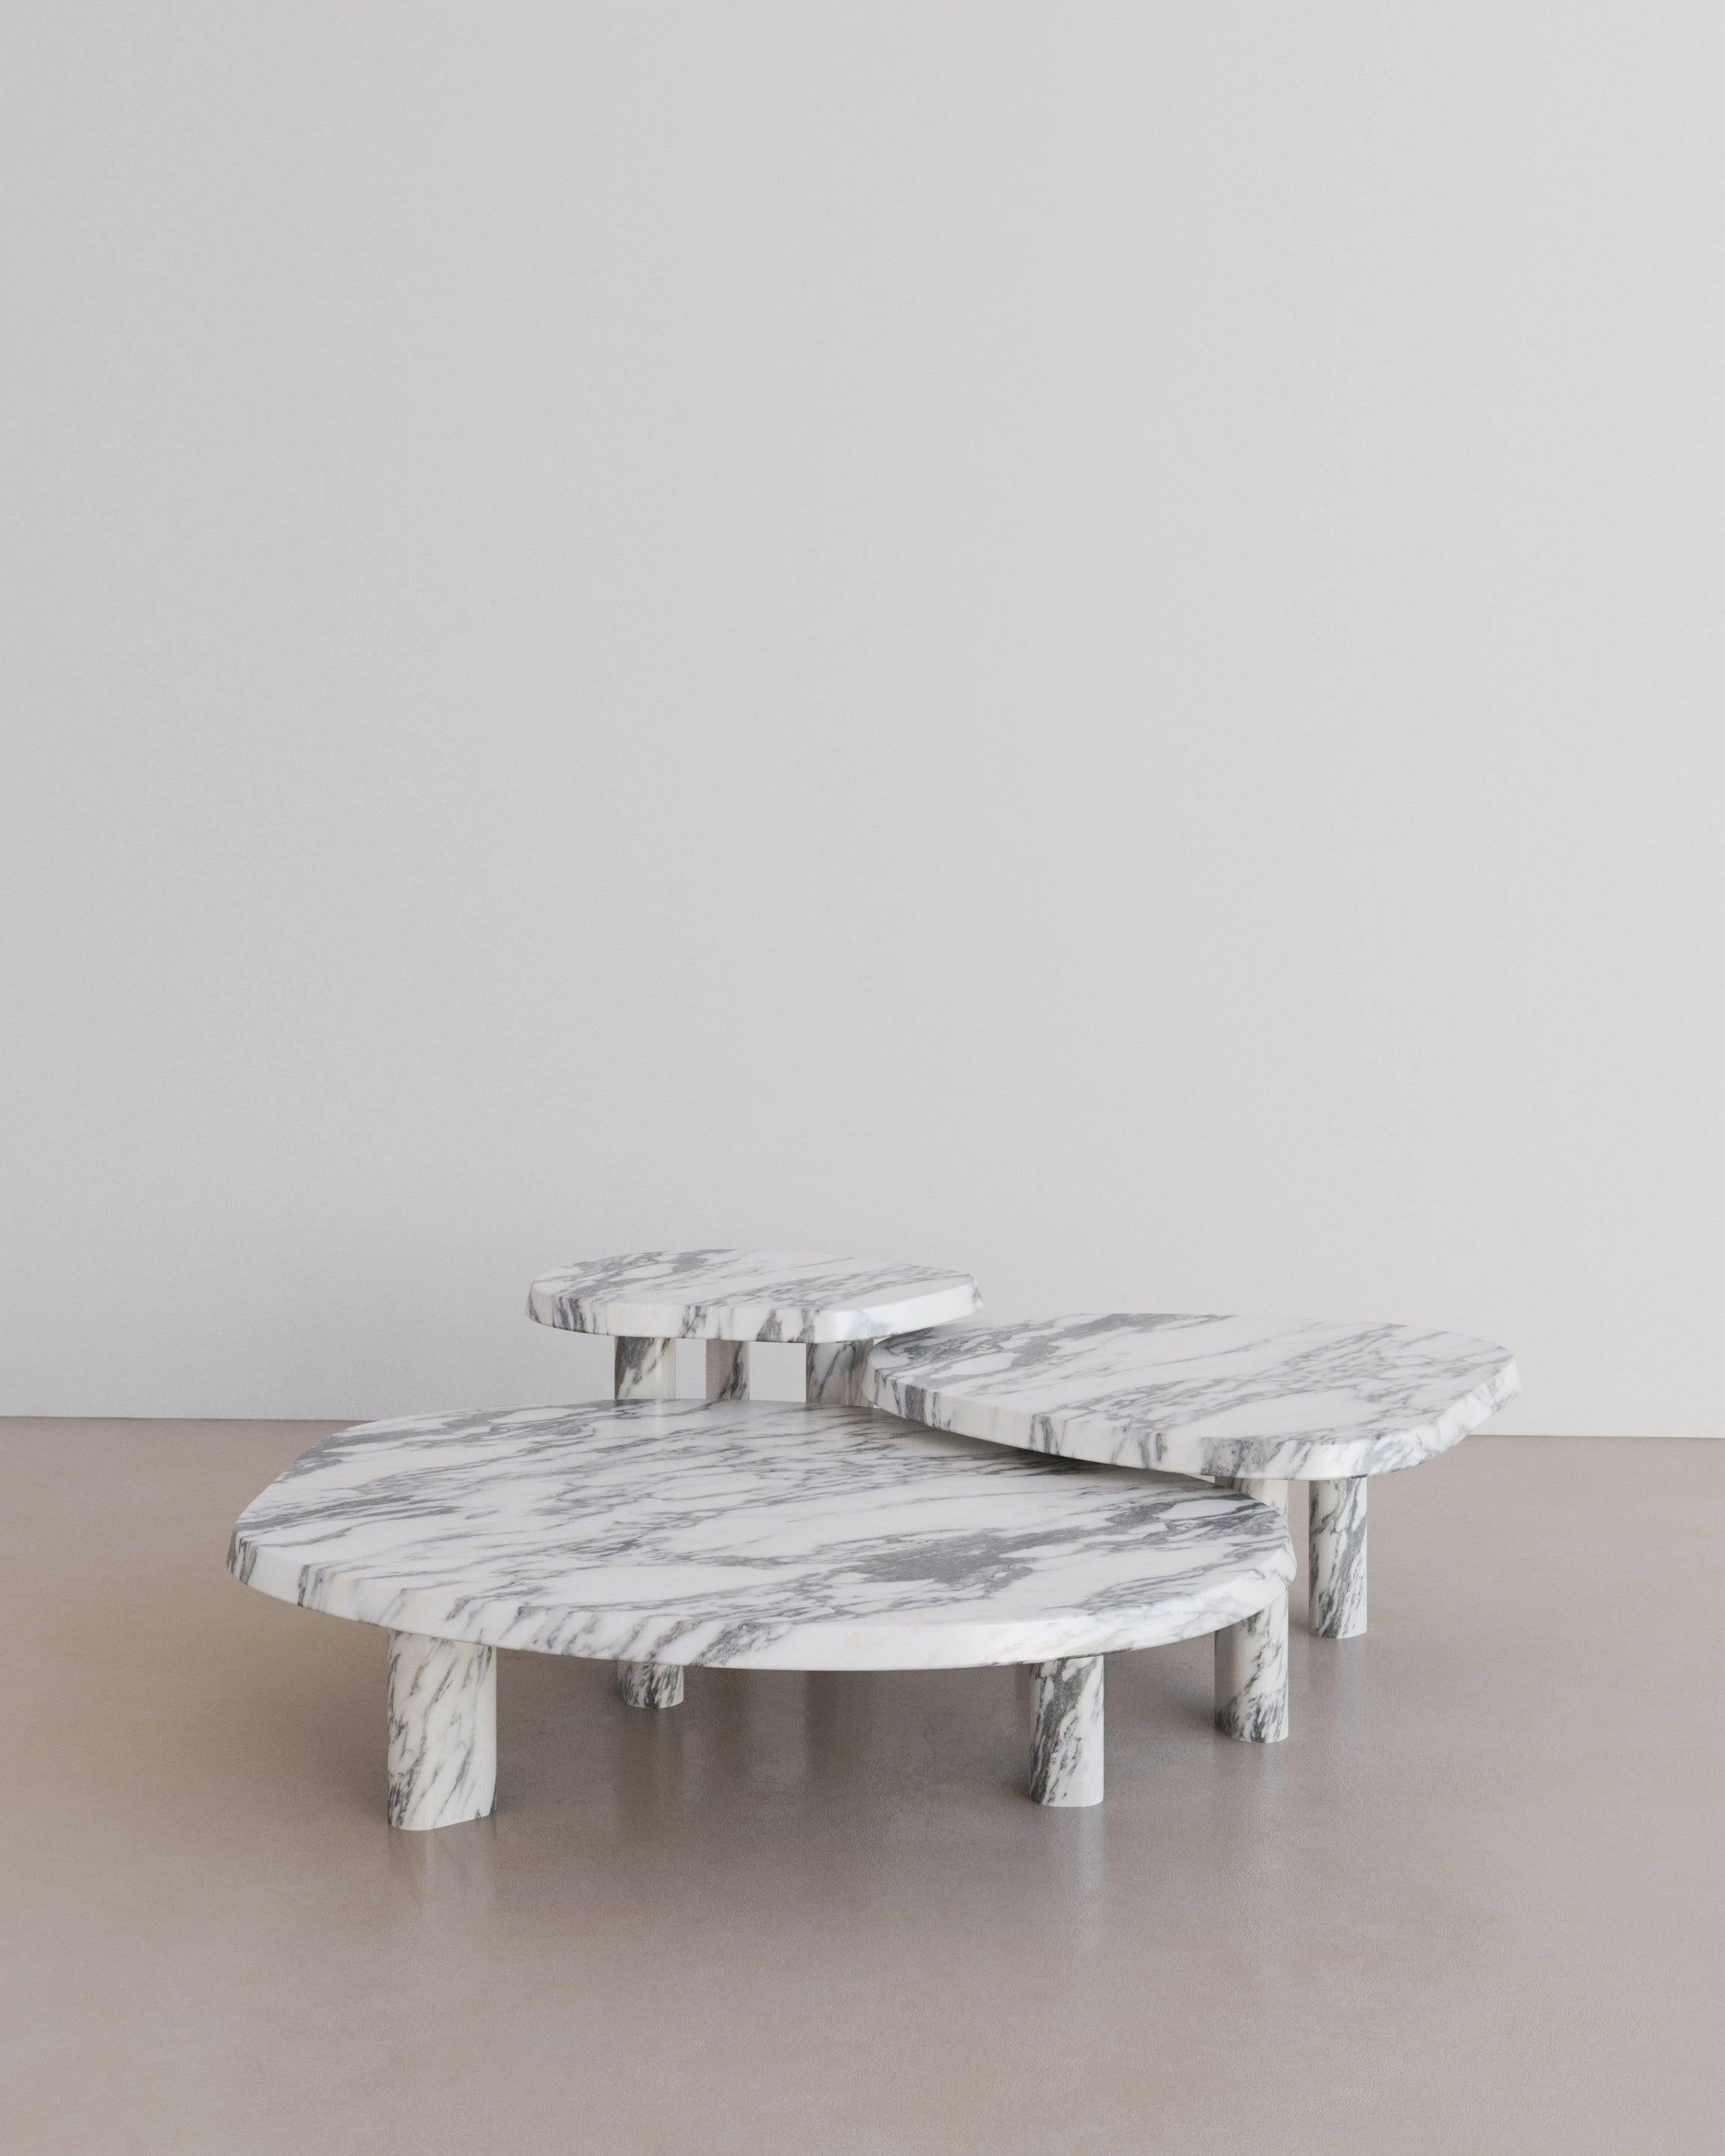 The Fiori Coffee Table in Bianco Arabescato Marble by The Essentialist infers a delicate sense of organicism, a vision of sublime is born, revolutionising beauty and deifying stone in its truest expression. Fiori forges a perpetual statement of